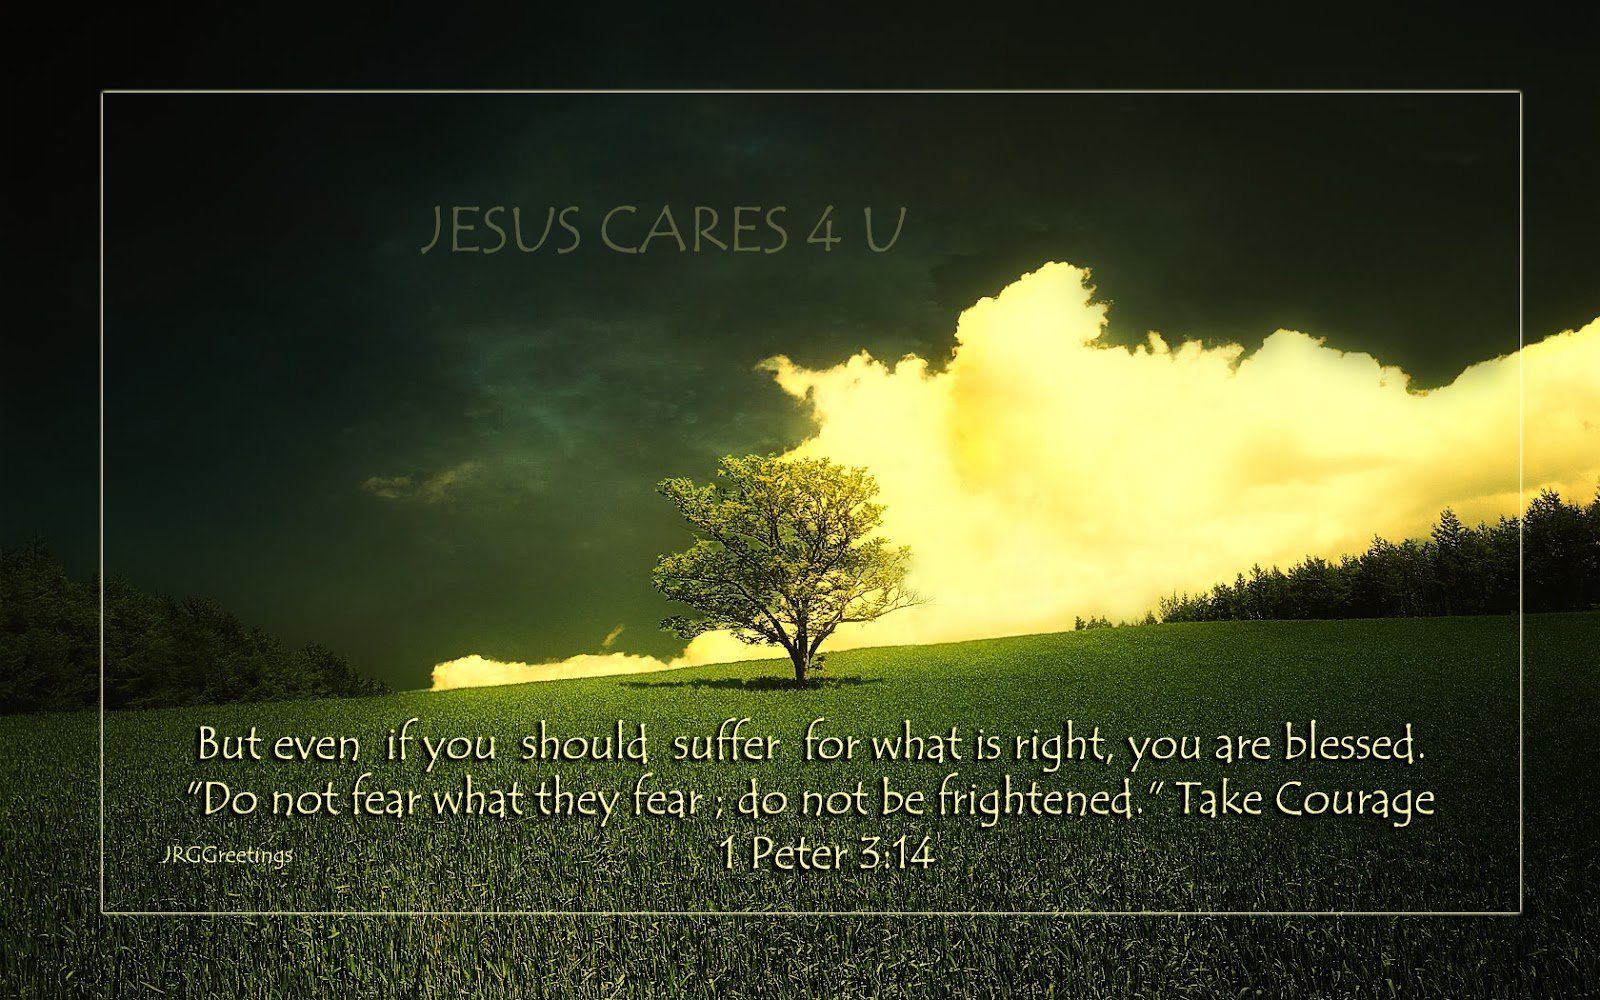  Card Wallpapers Free High Quality Free Christian Desktop Wallpapers